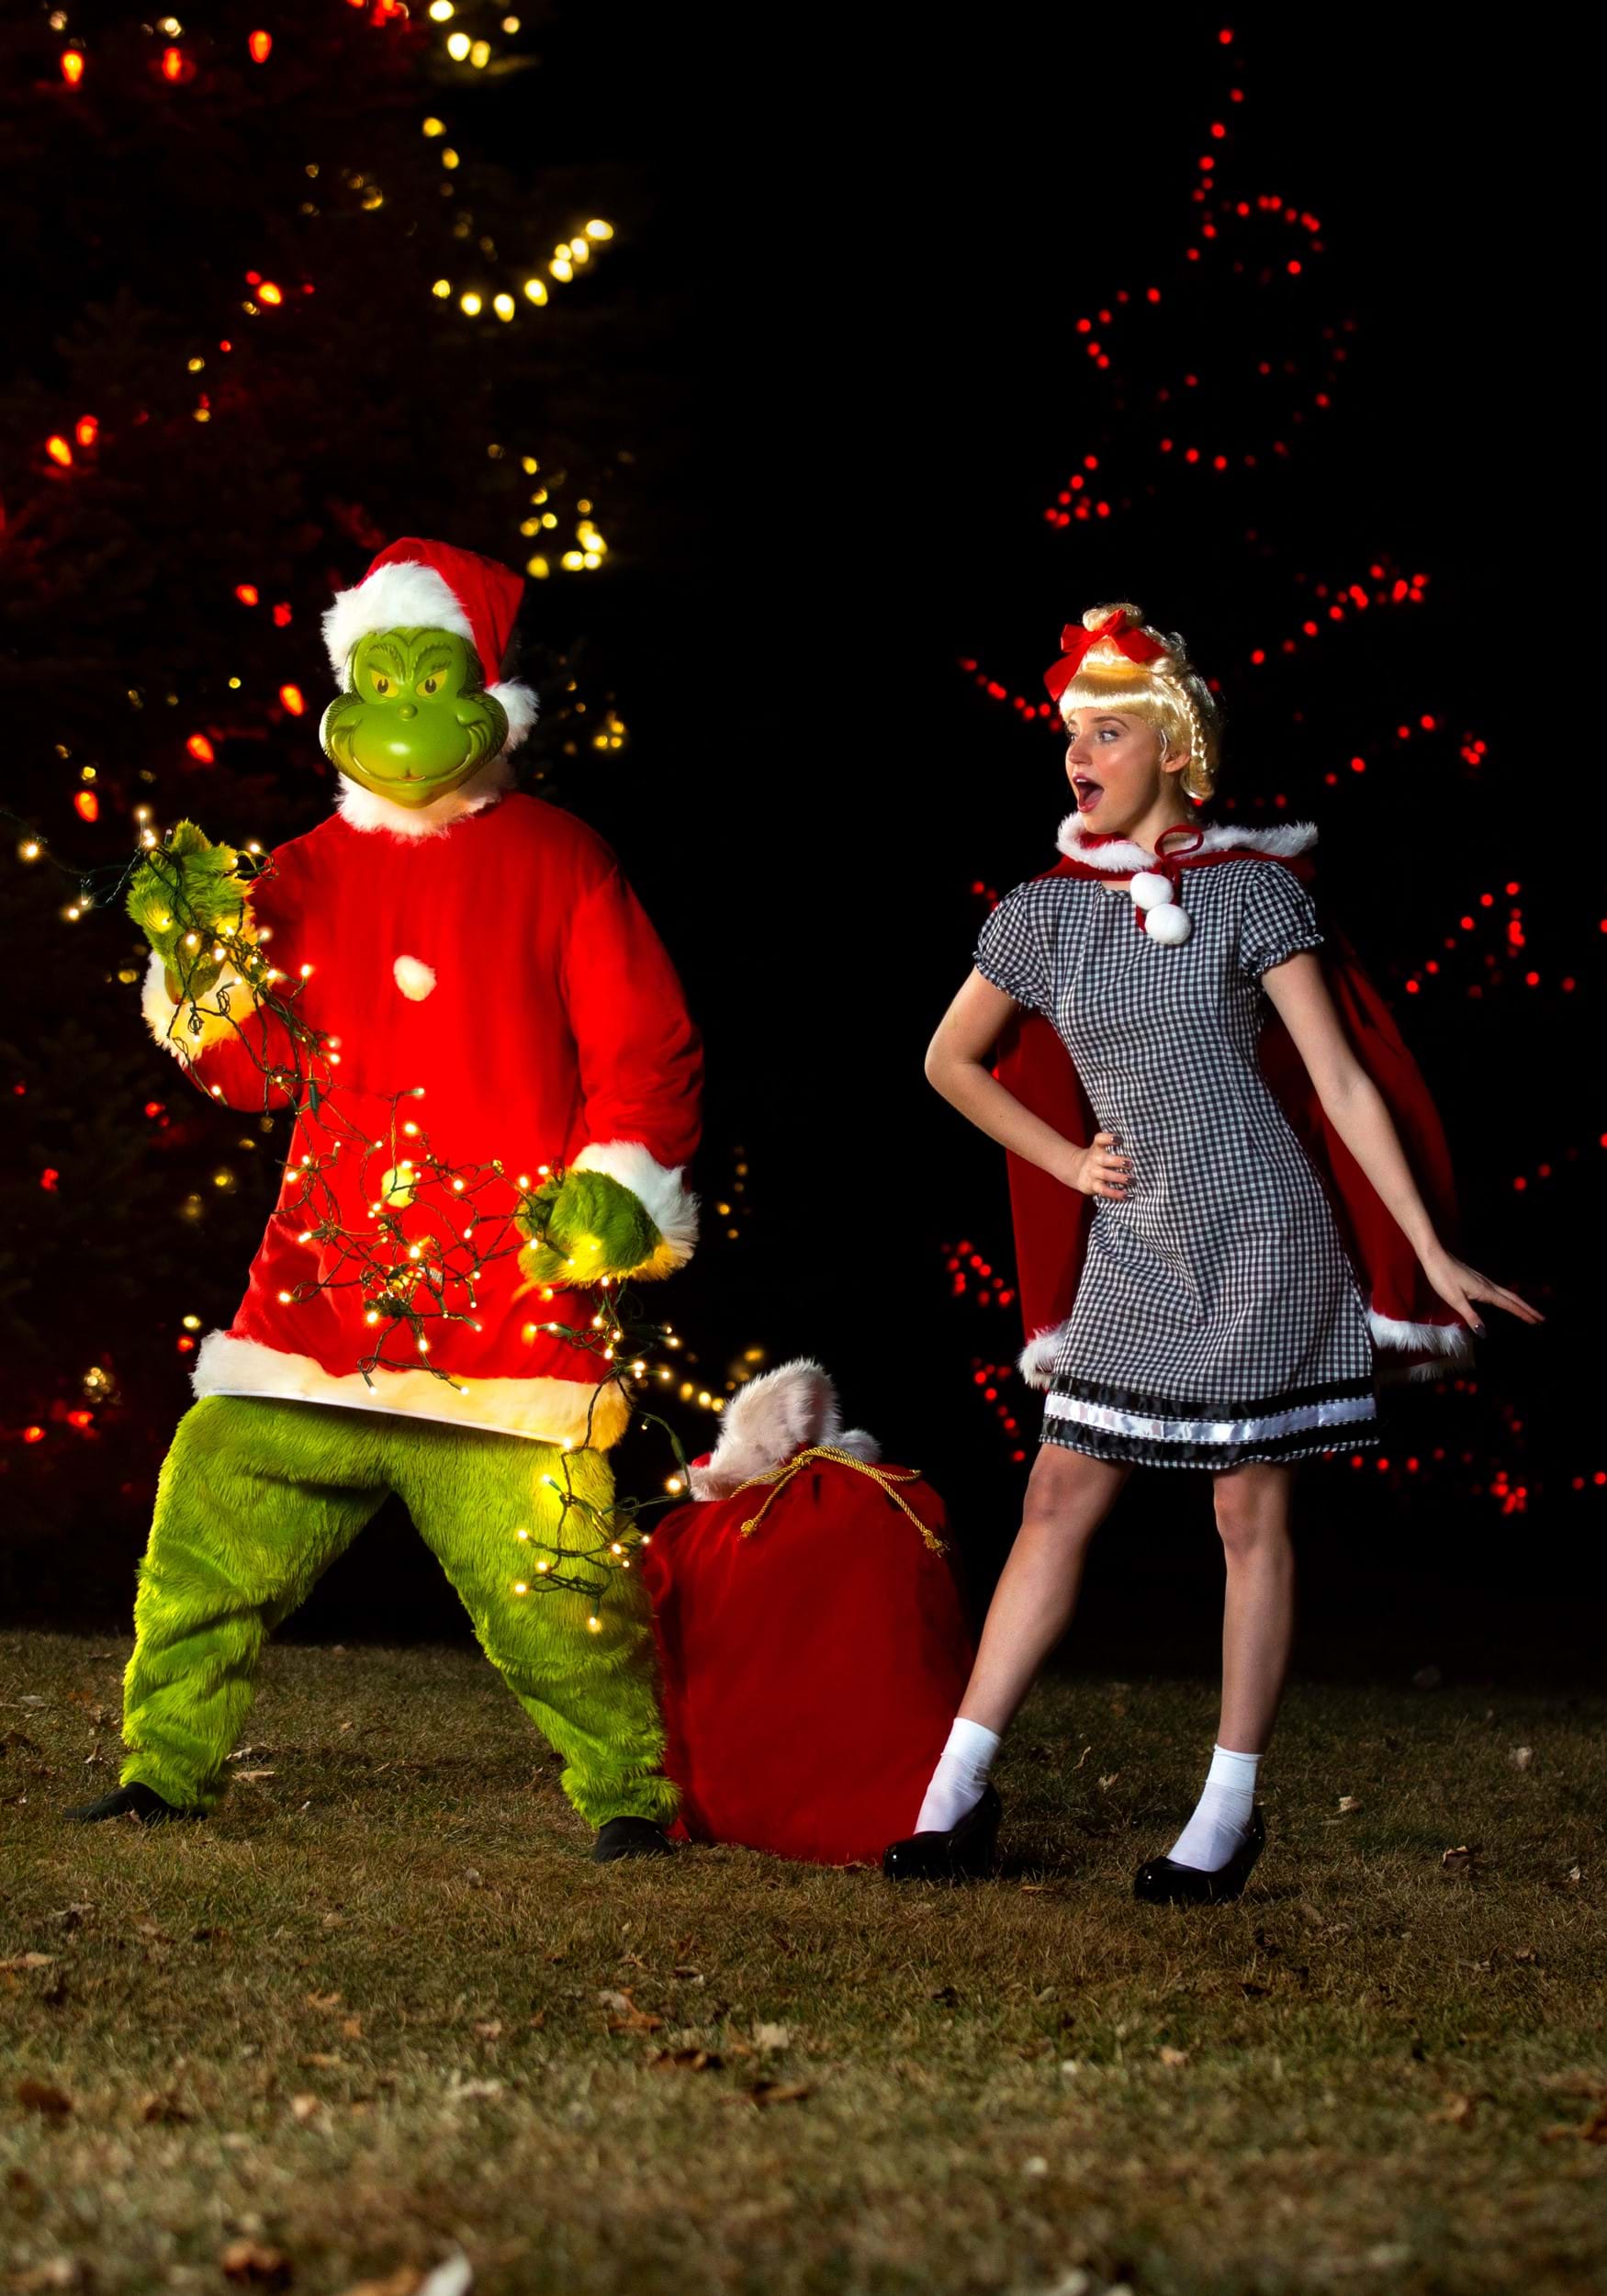 The grinch makeup, Grinch costumes, Christmas character costumes